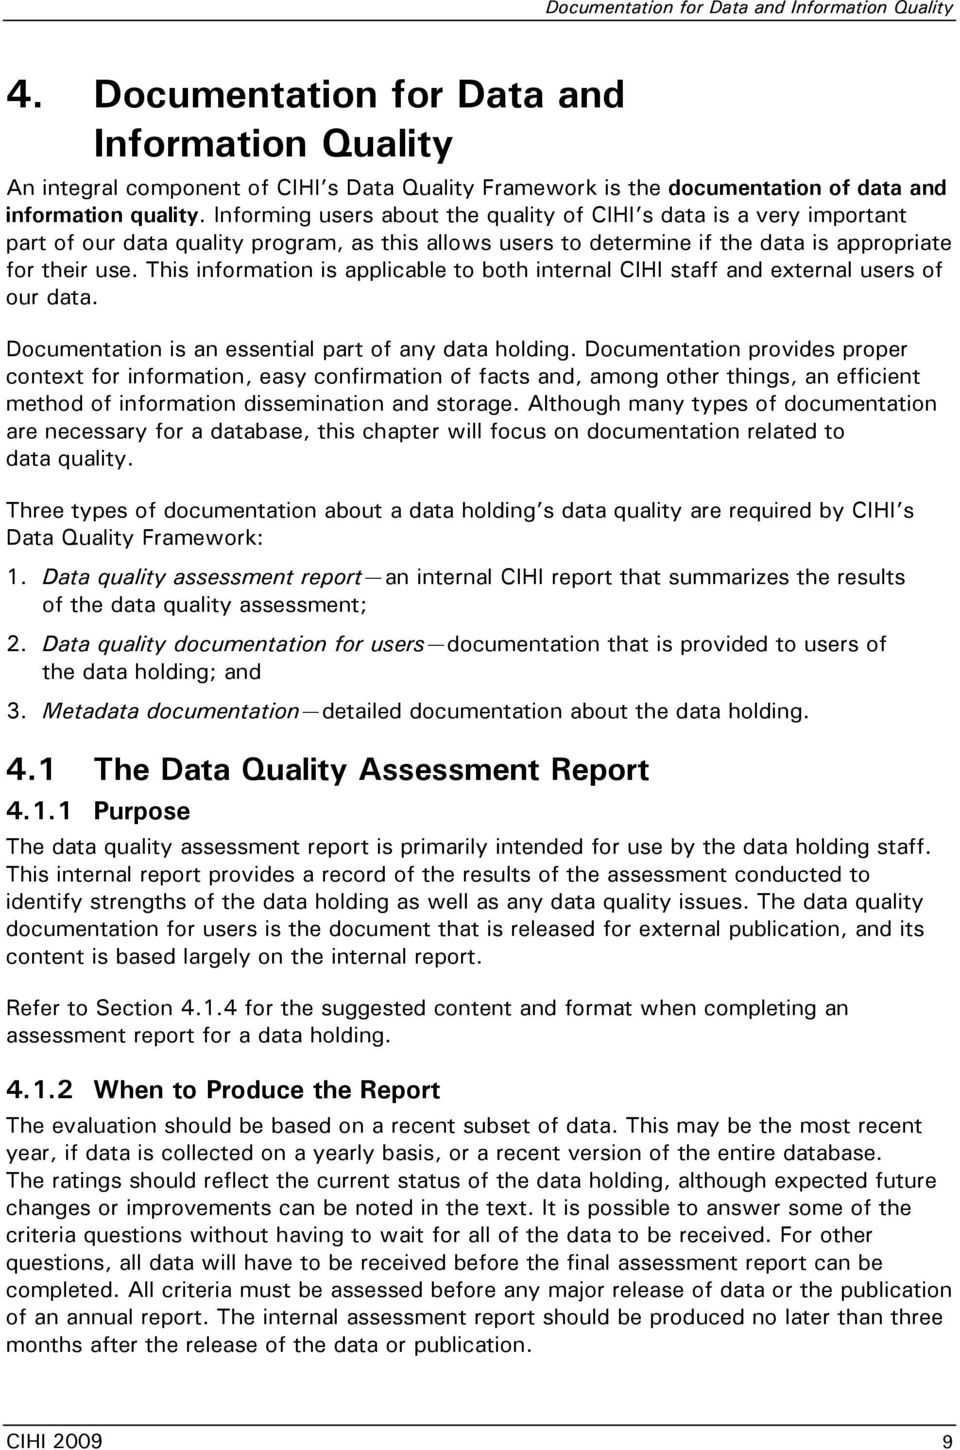 The Cihi Data Quality Framework – Pdf Free Download Intended For Data Quality Assessment Report Template